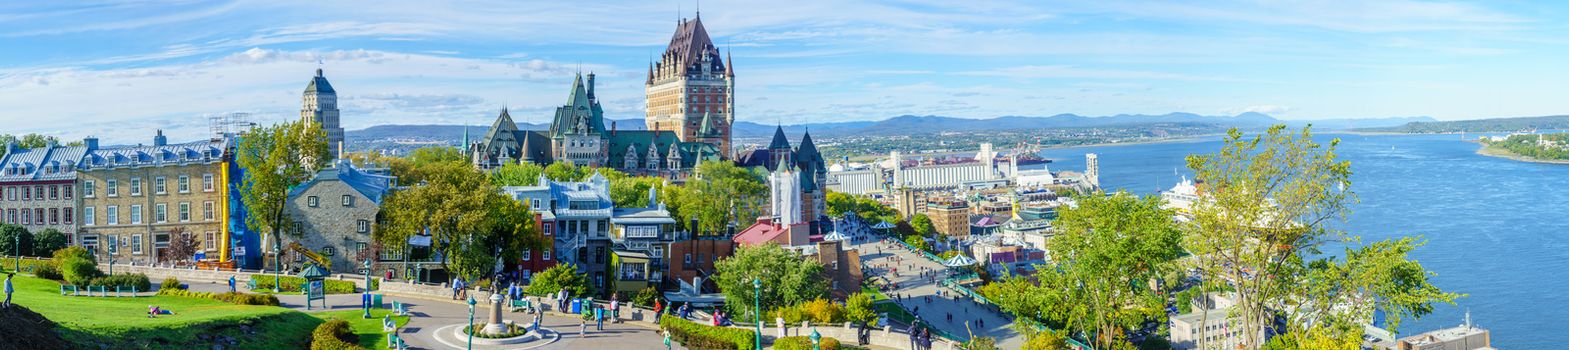 Quebec City, Canada - September 27, 2018: Panoramic view of the old town and the Saint Lawrence River from the citadel, with locals and visitors, Quebec City, Quebec, Canada